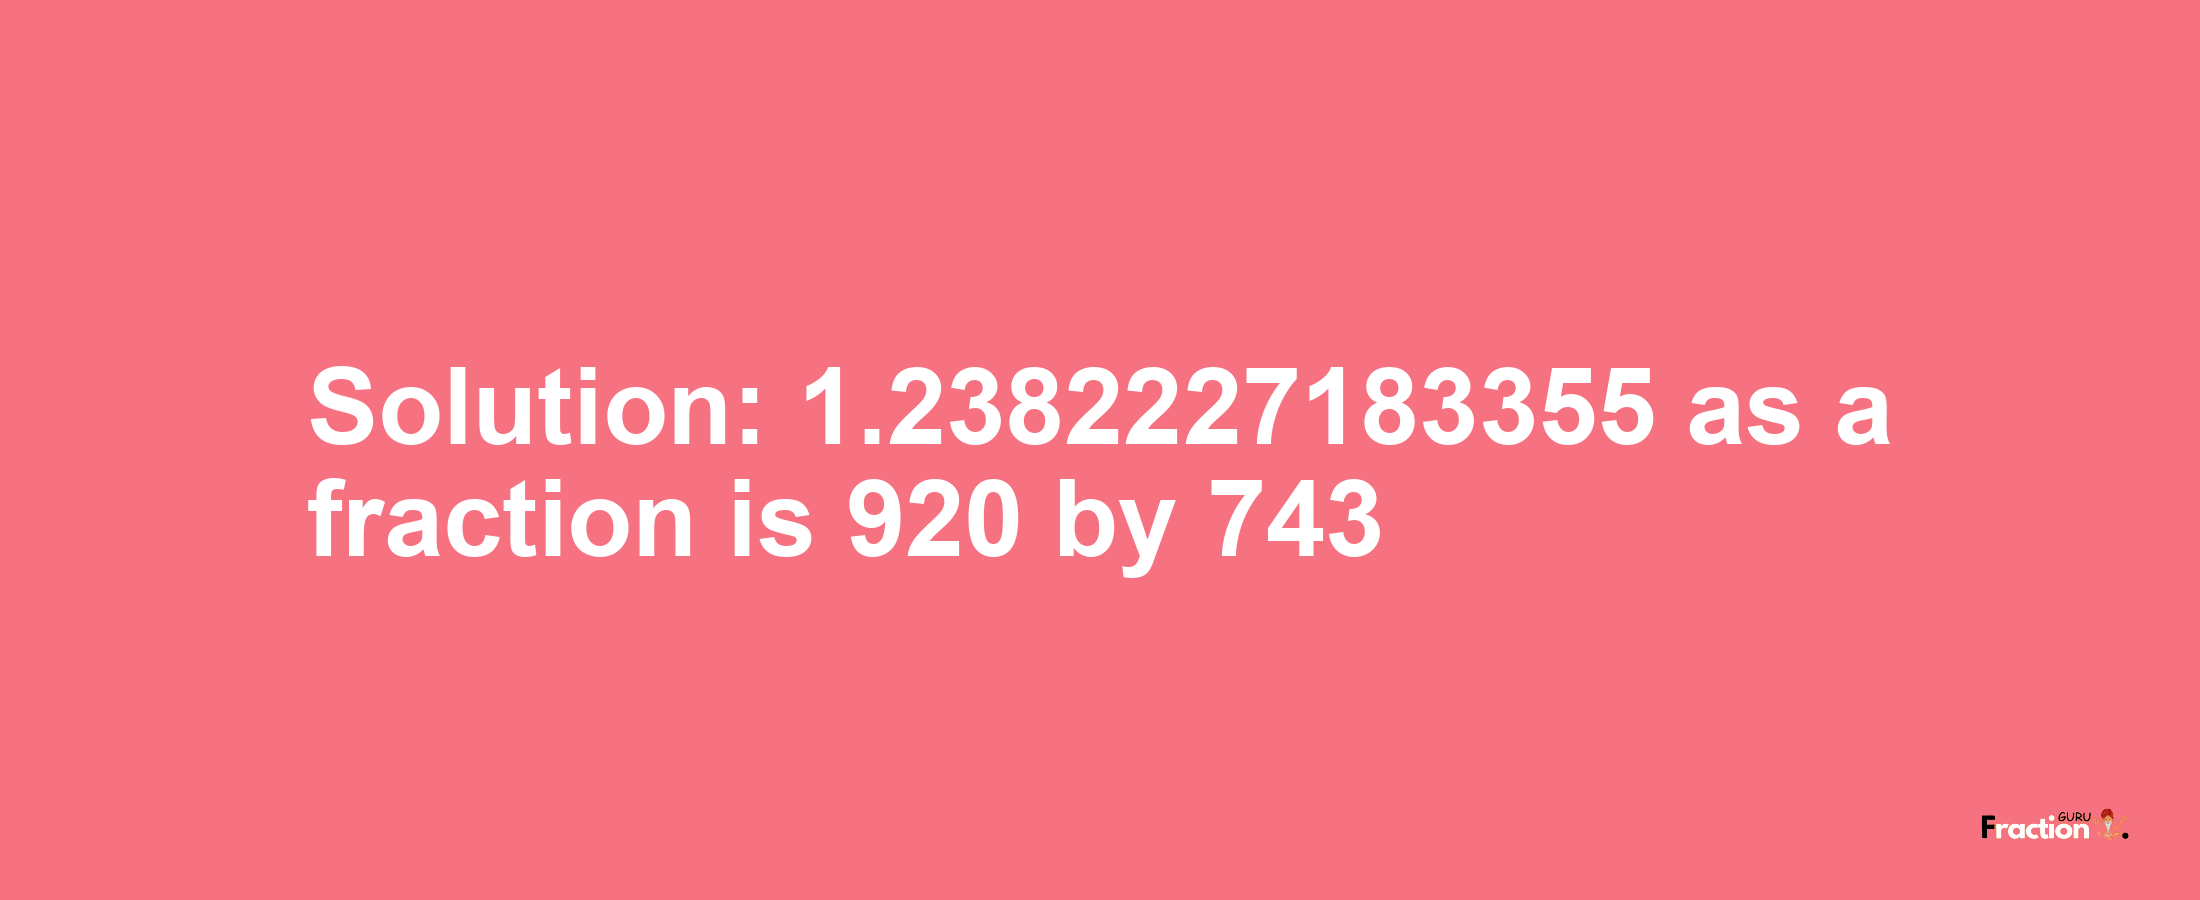 Solution:1.2382227183355 as a fraction is 920/743